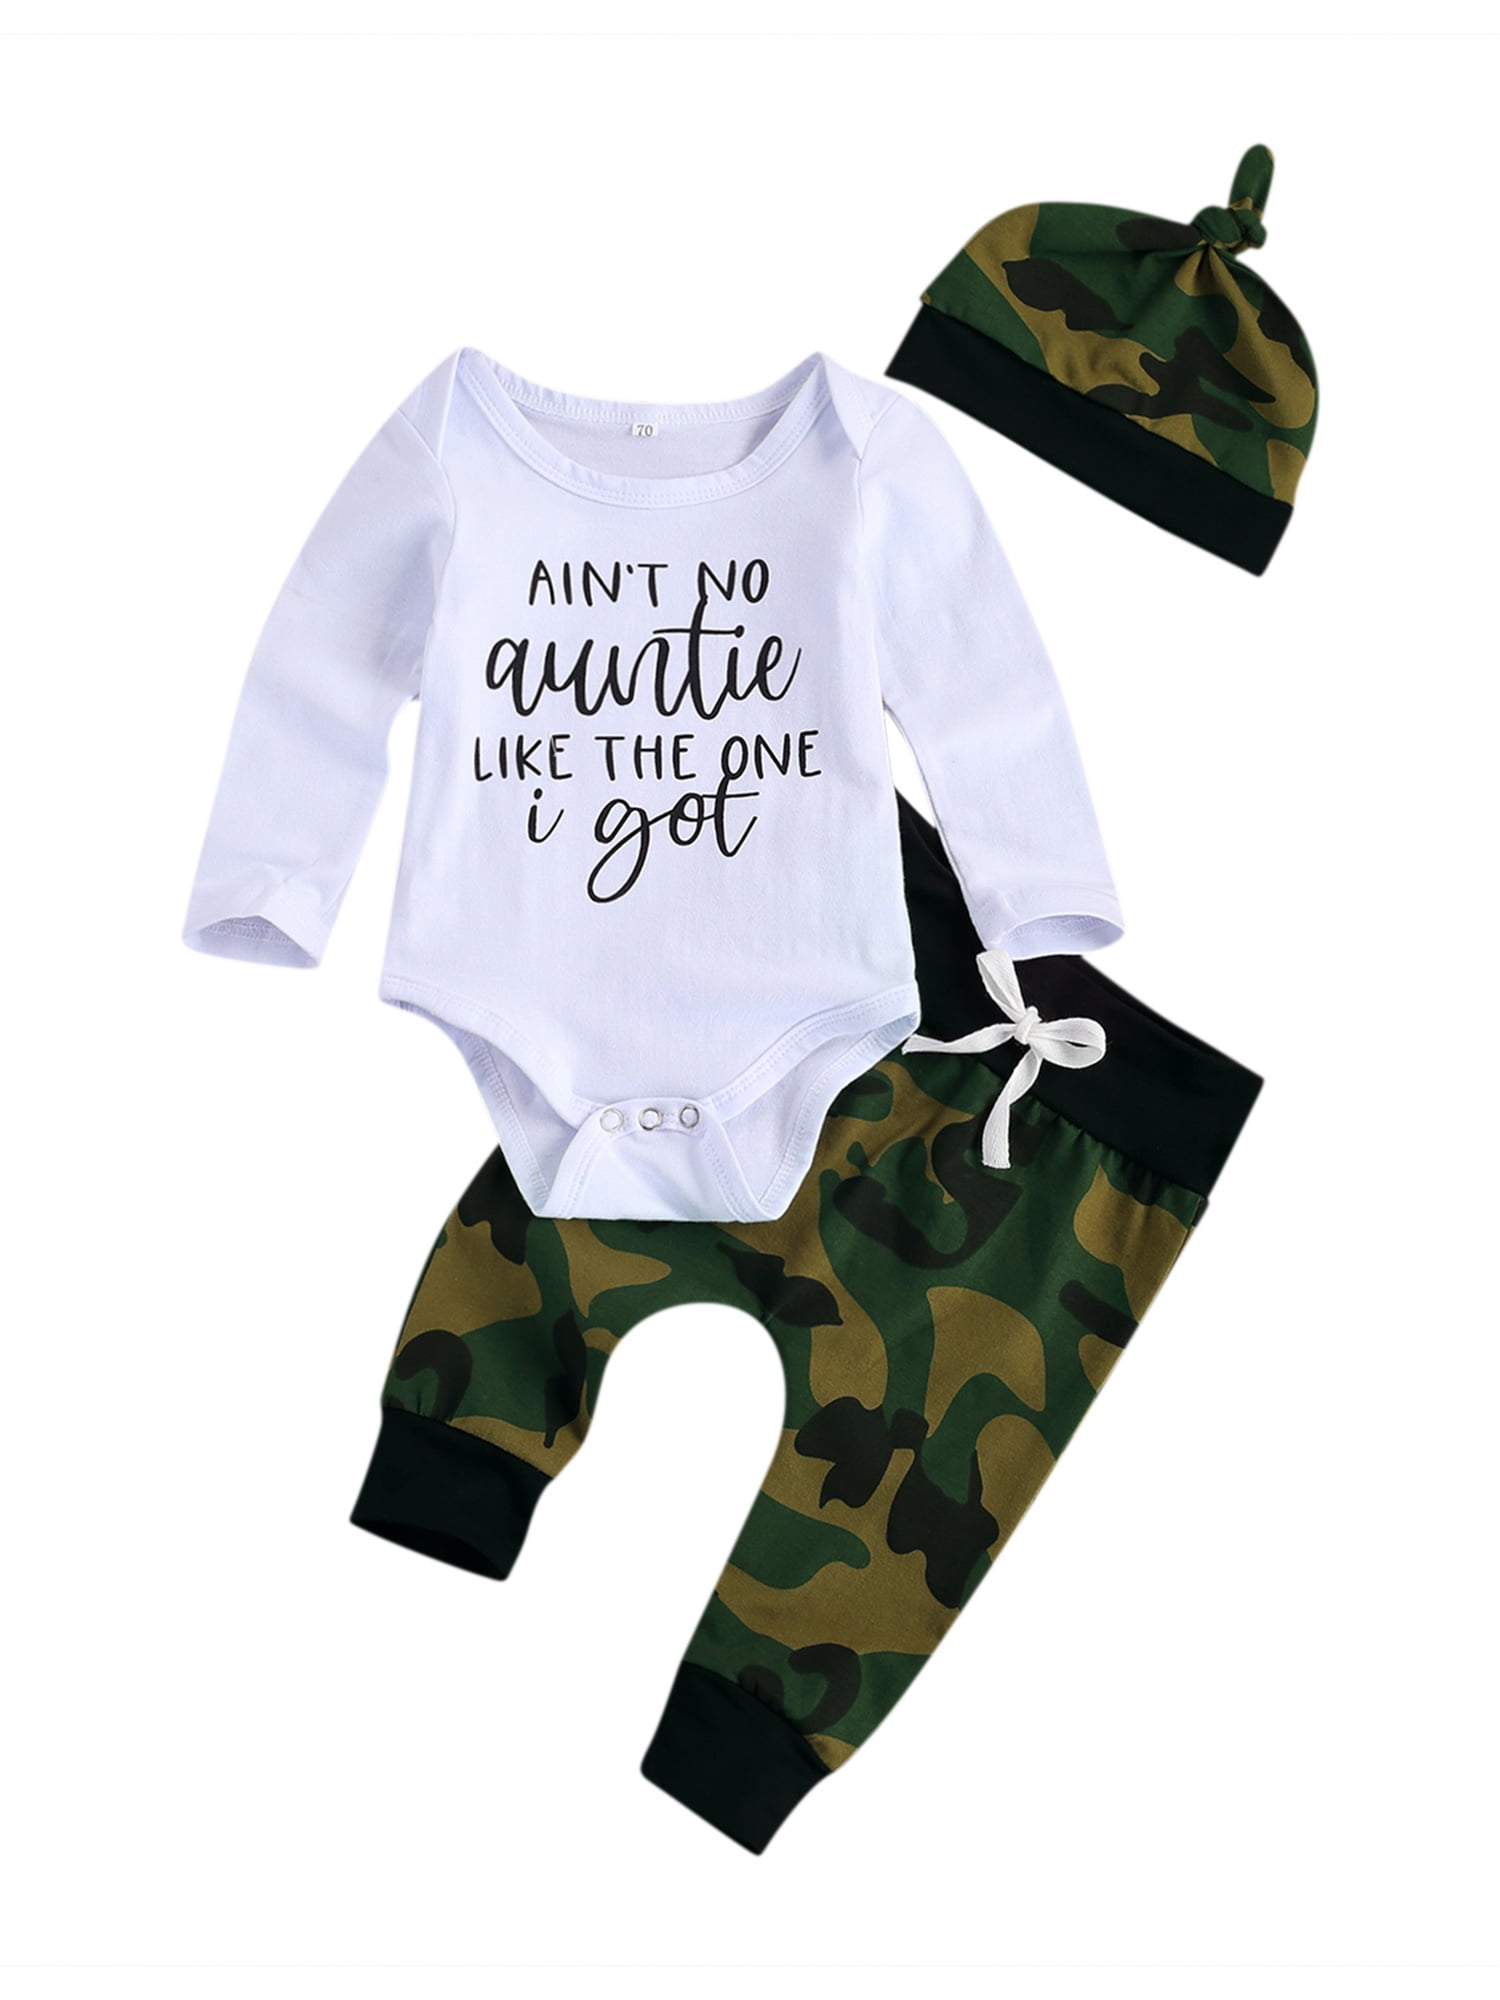 Hat Pants Unisex Baby Boys Girls Little Cutie Outfits Sets Letter Printed Romper Headband Long Sleeve Clothes 